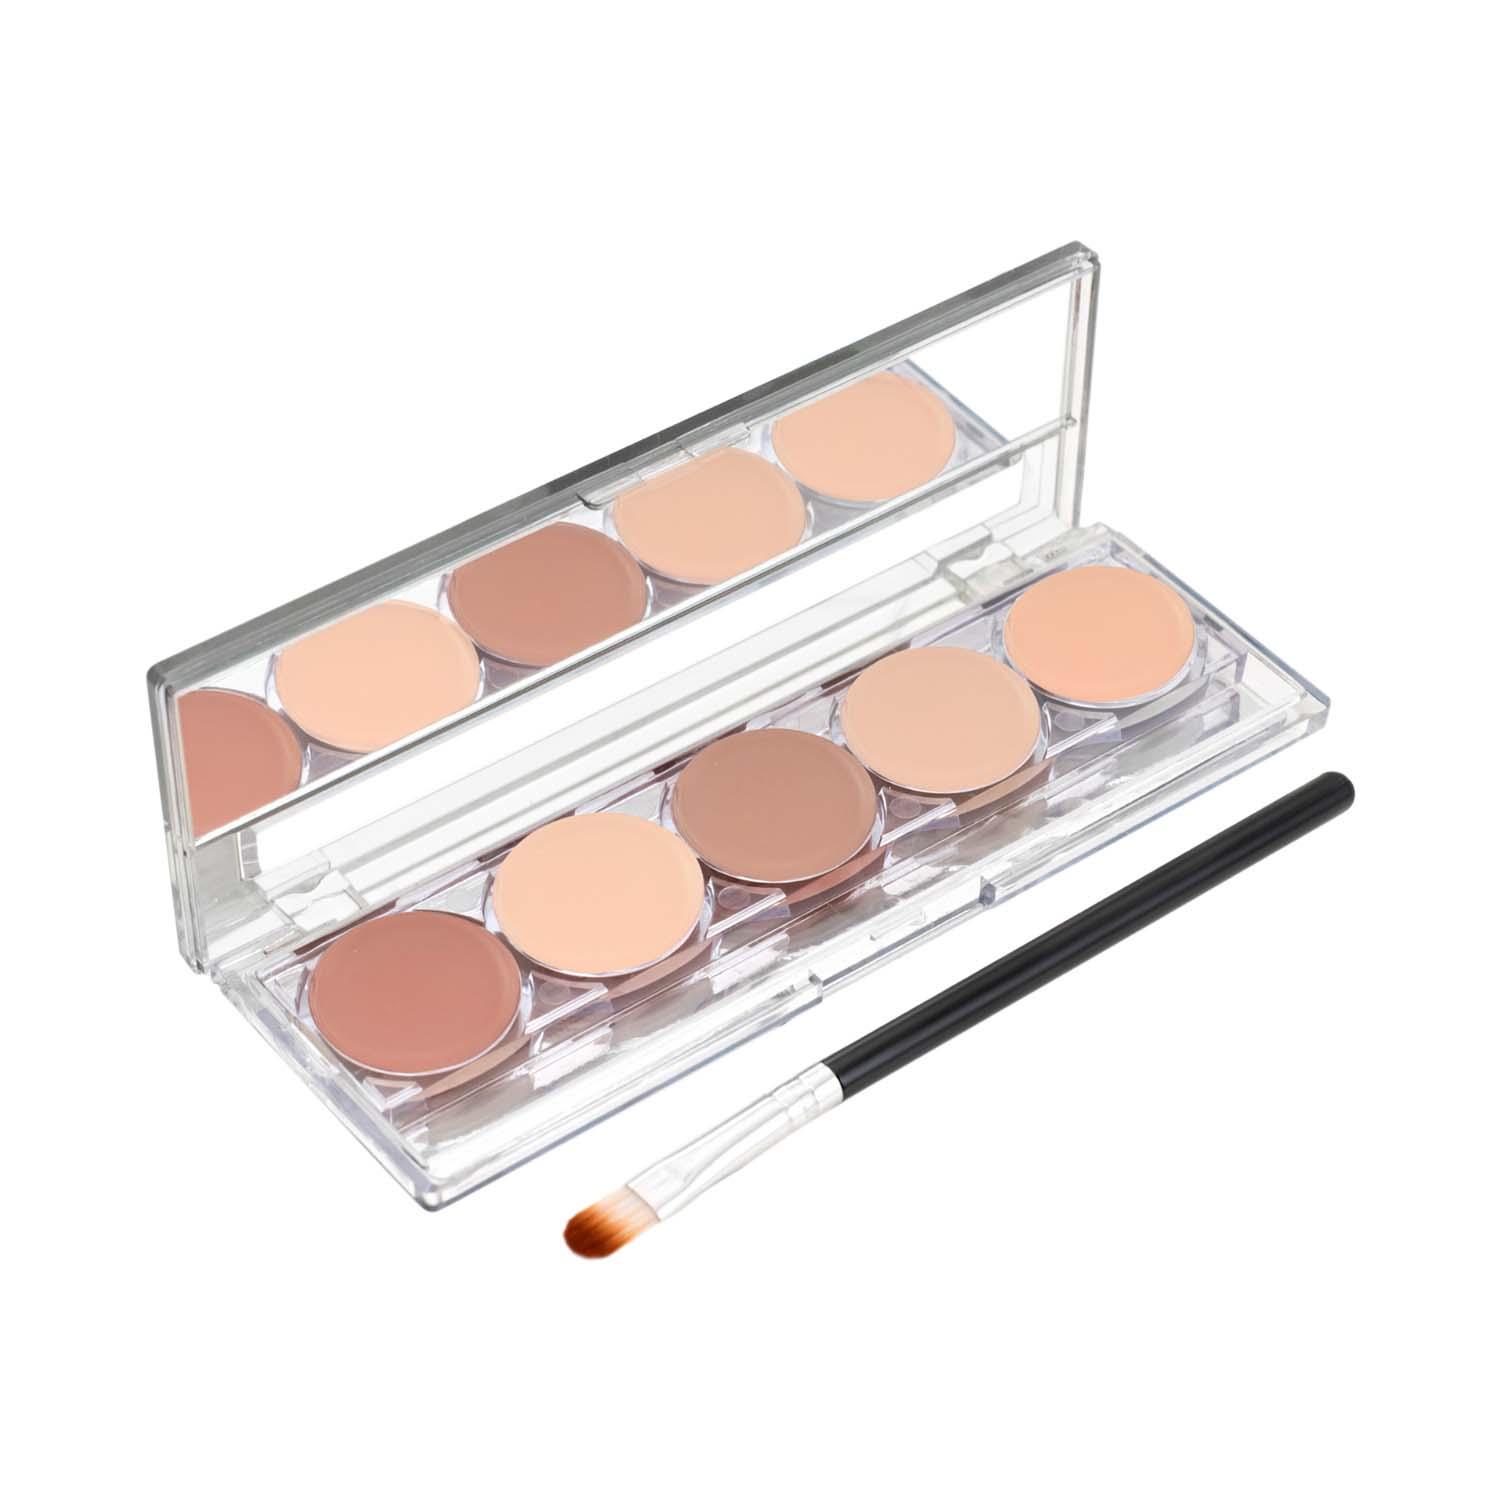 MARS | MARS 5 Colour Contour Kit With Free Applicator - 01 Shade (8 g)